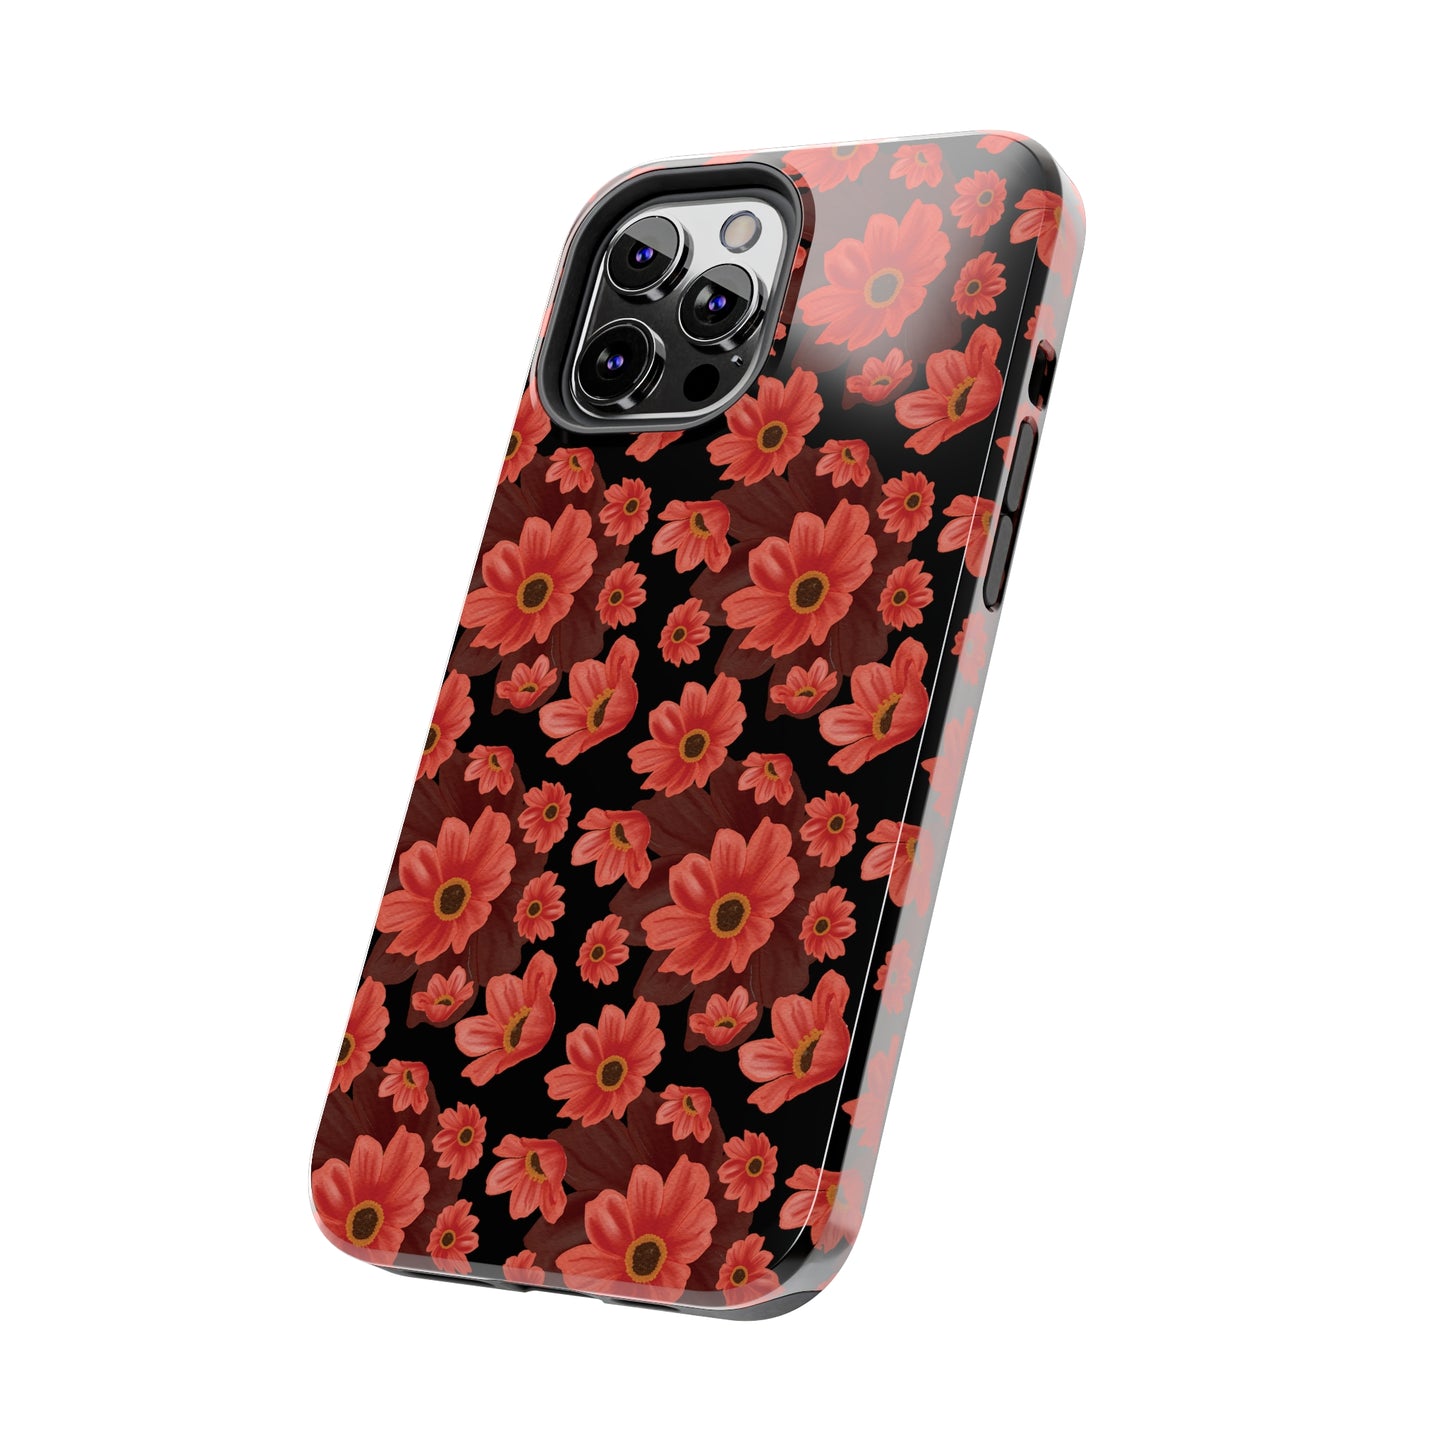 Large Red Flower Design Iphone Tough Phone Case